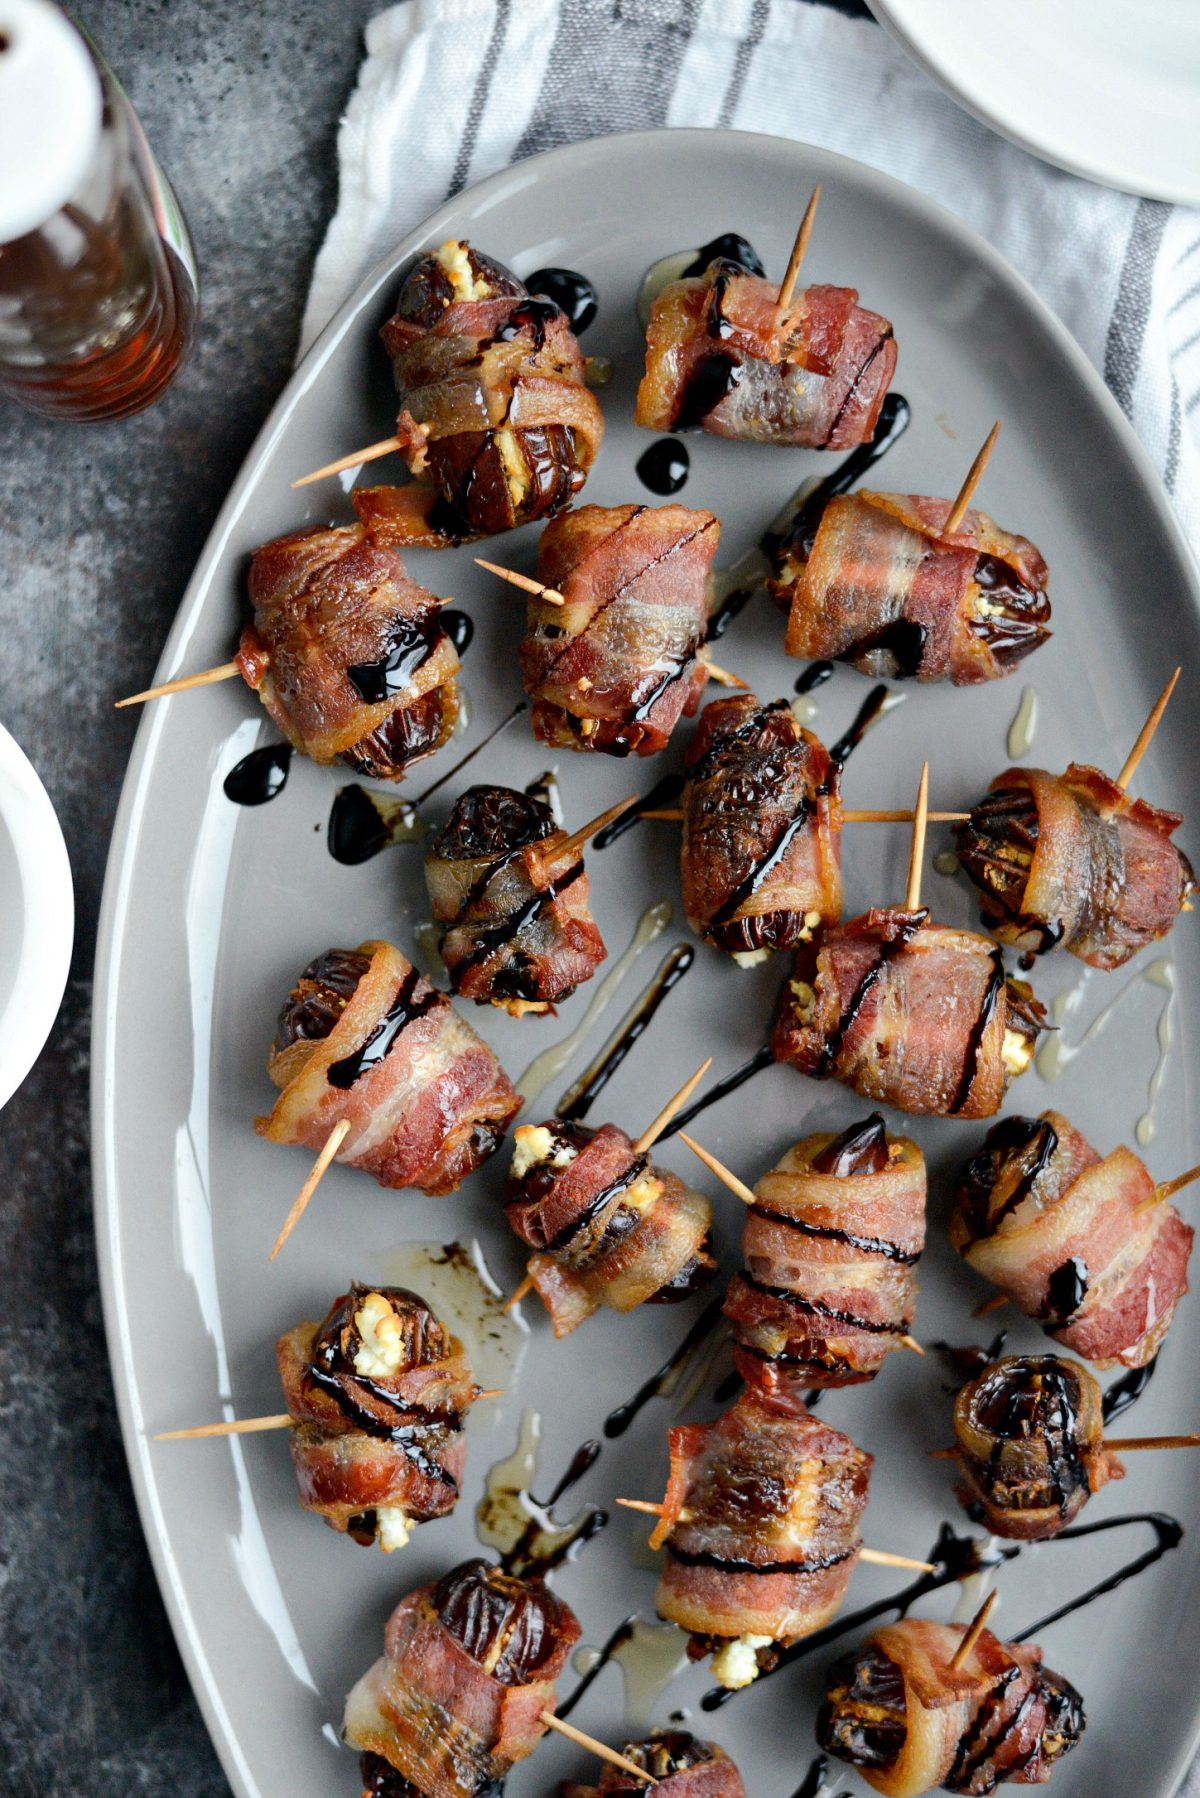 Drizzle with honey and balsamic glaze.